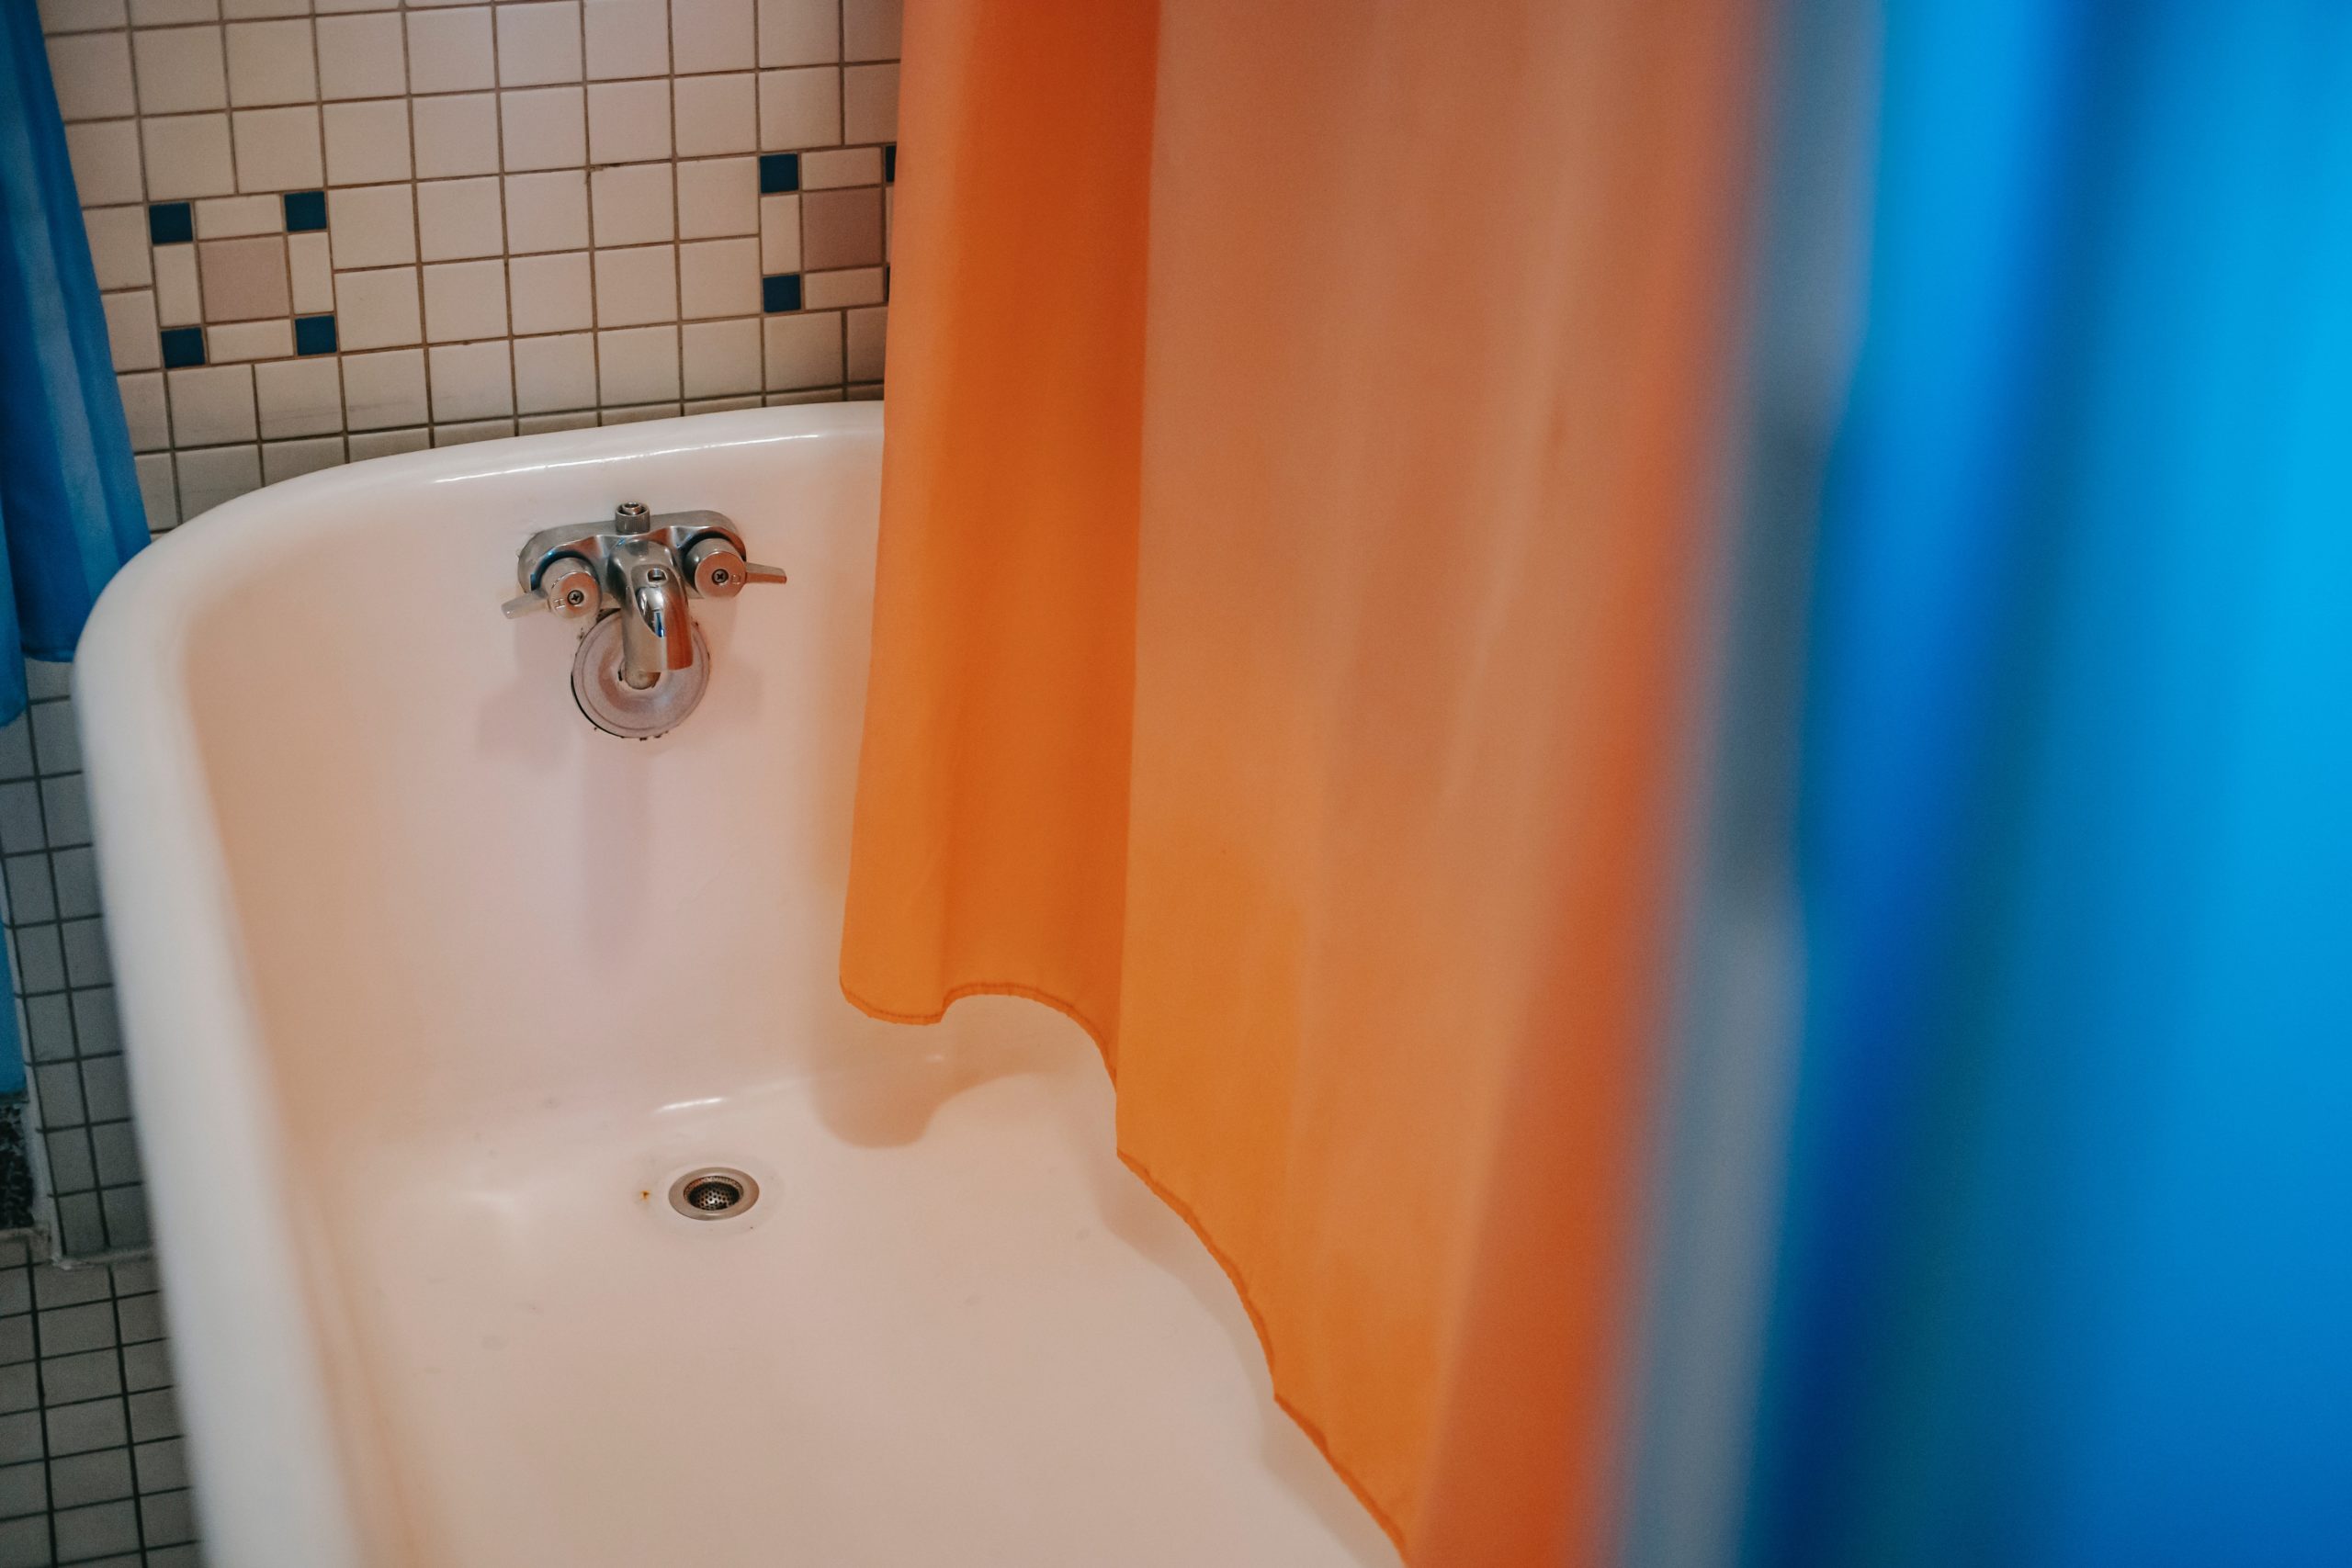 Orange Stains In Bathtub Causes Diy, Home Remedies To Clean A Stained Bathtub